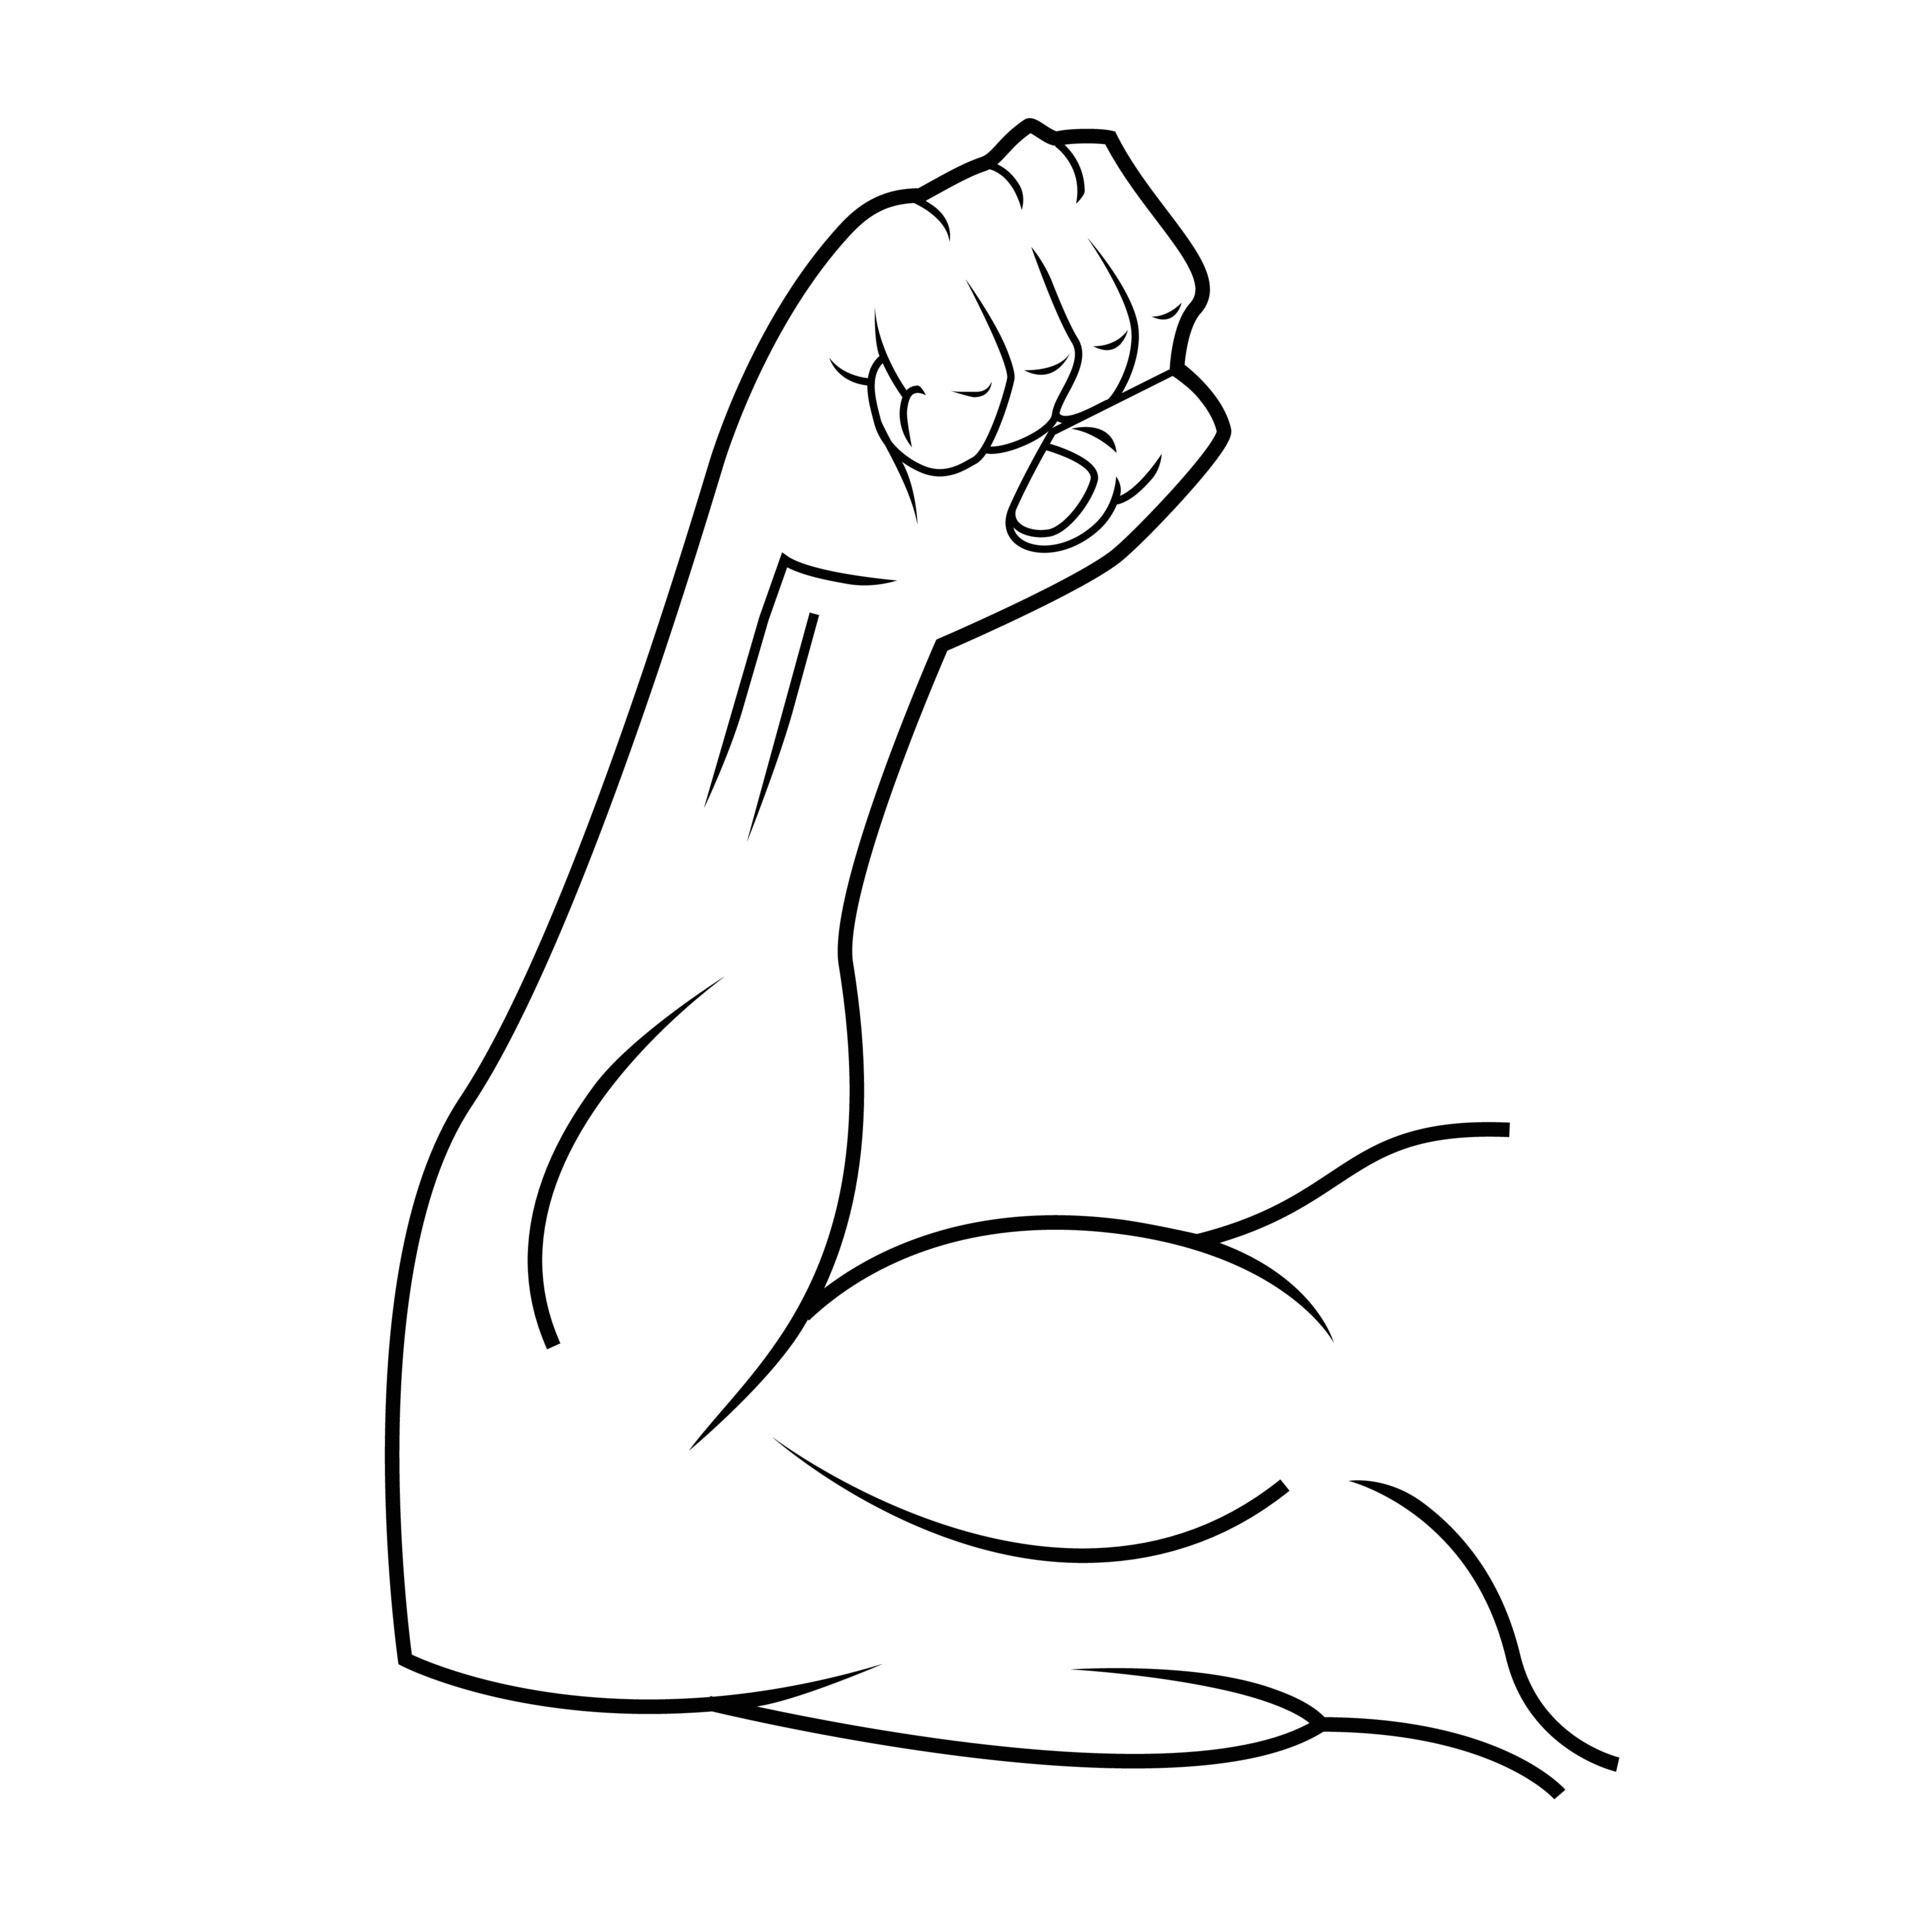 Muscle Hands Black and White 14486593 Vector Art at Vecteezy